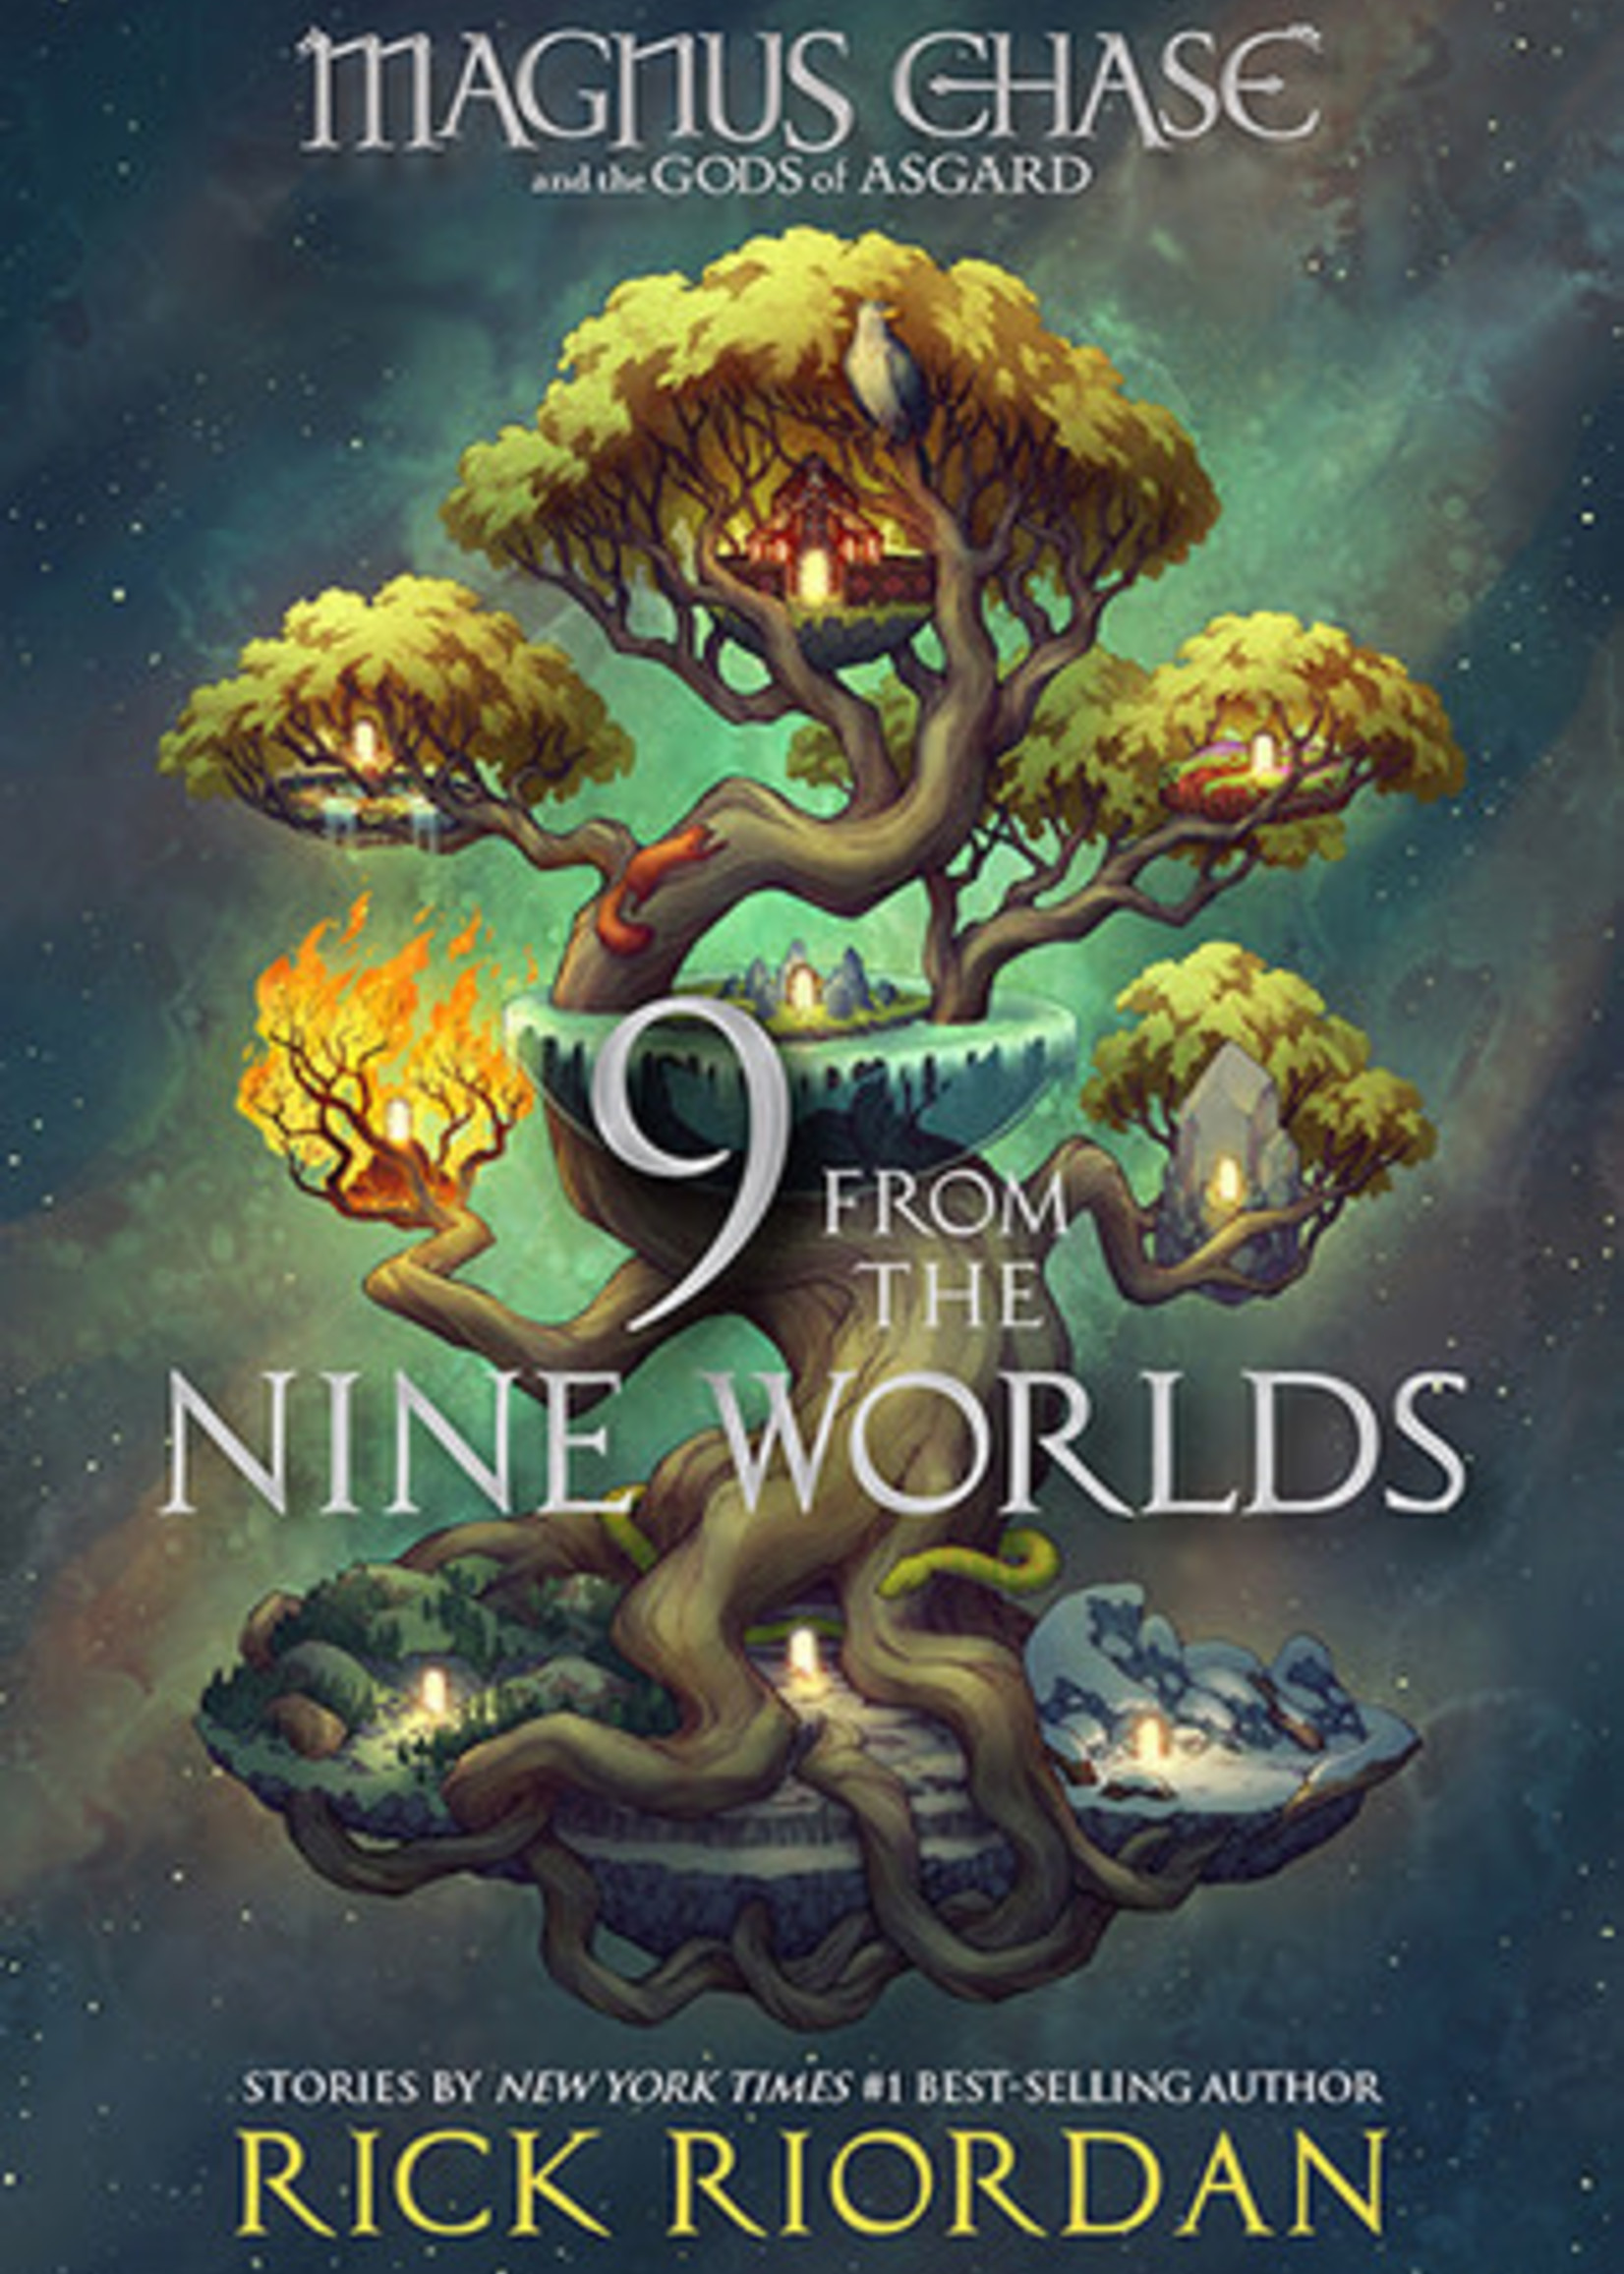 9 From the Nine Worlds (Magnus Chase and the Gods of Asgard) by Rick Riordan